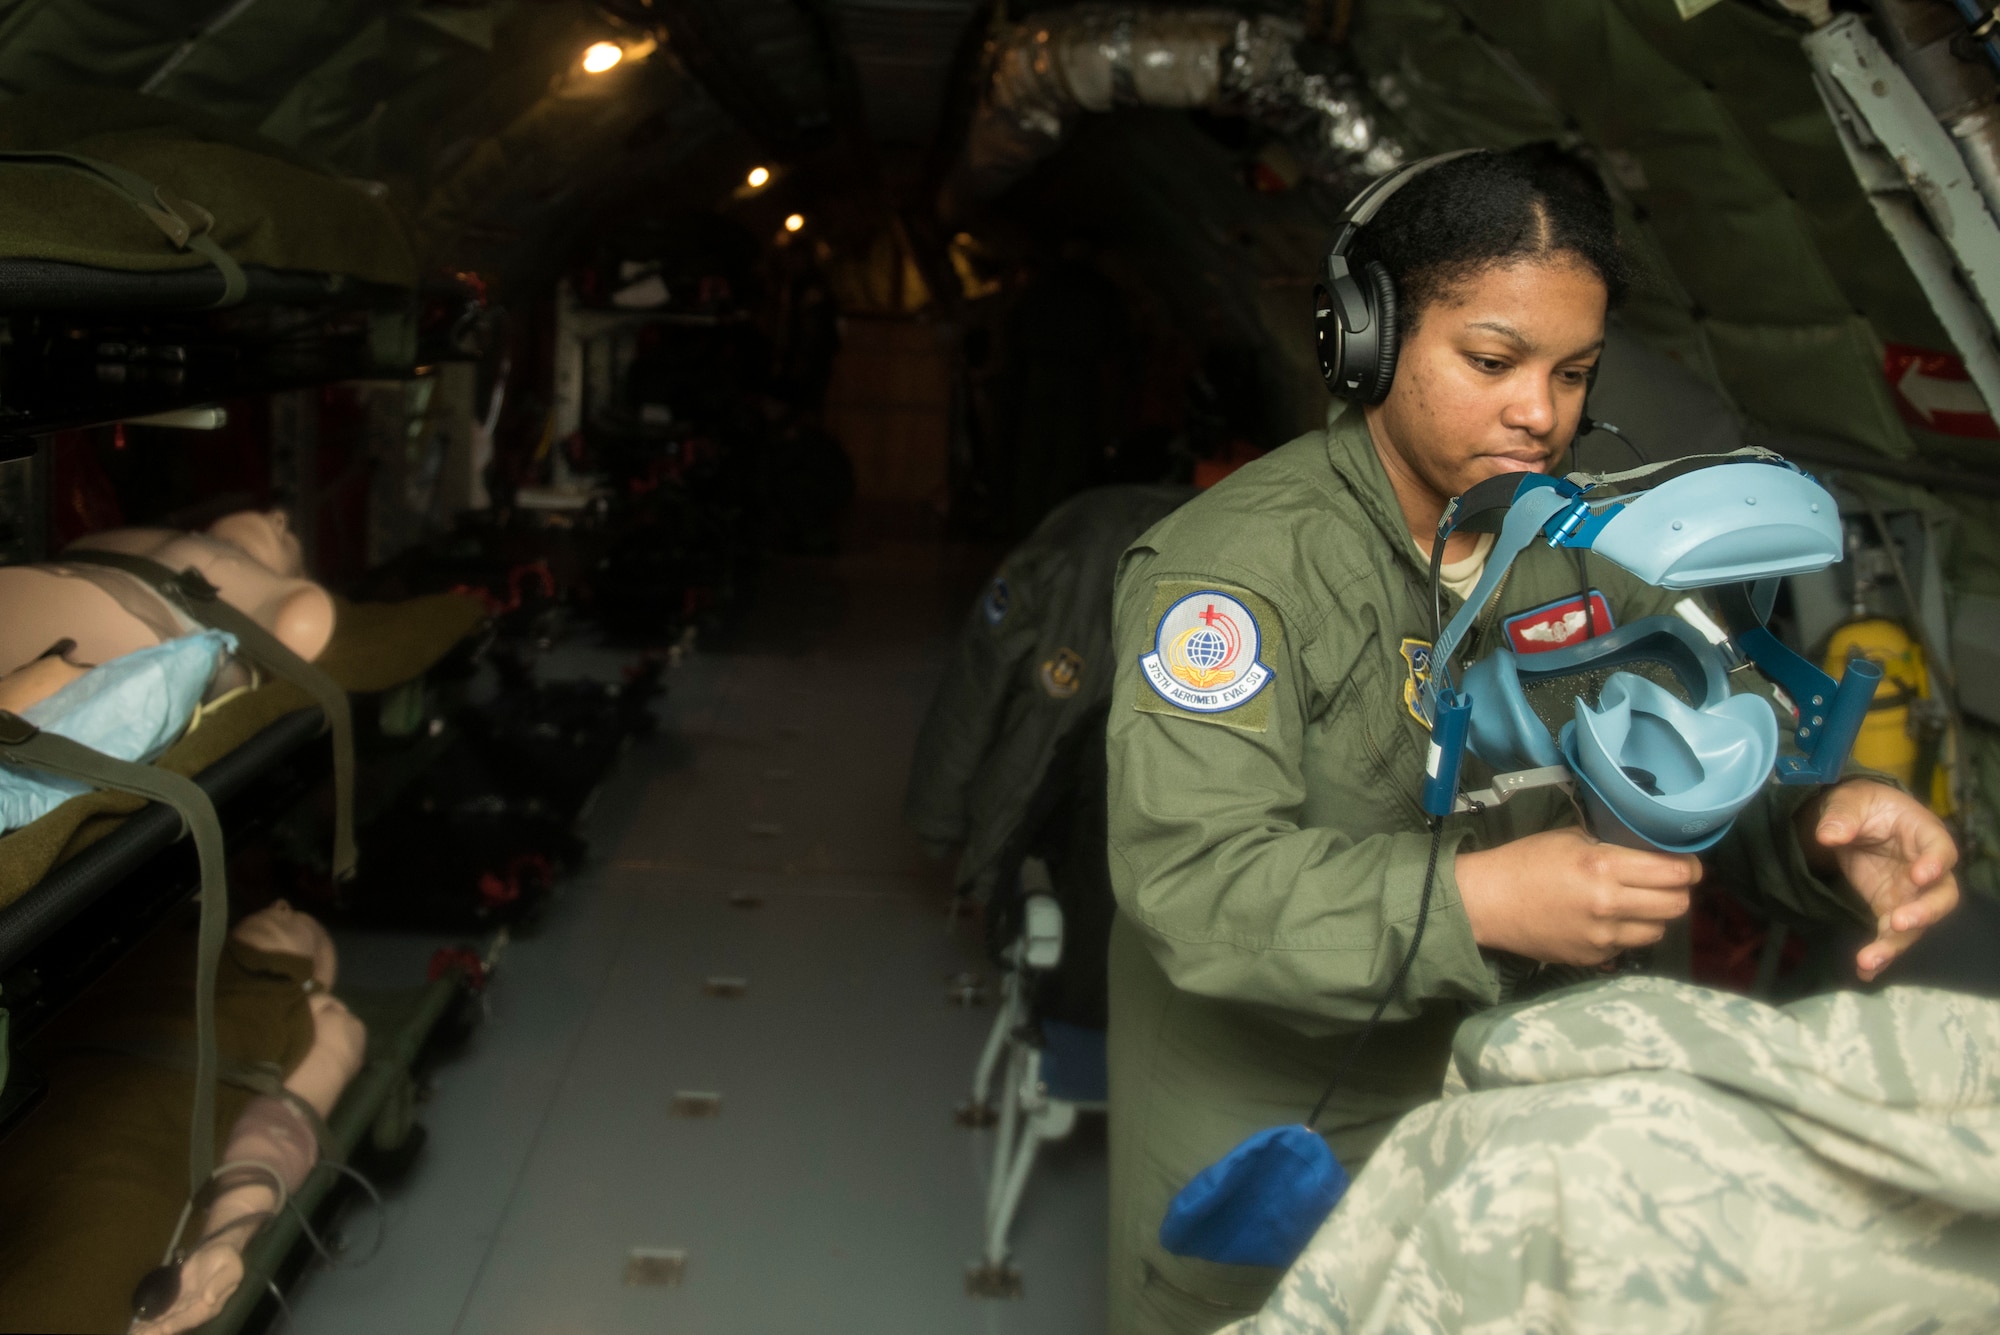 Staff Sgt. Raymeisha Childs, 375th Aeromedical Evacuation Squadron aeromedical technician, checks an oxygen mask during an aeromedical evacuation training at Fairchild Air Force Base, Washington, March 1, 2018. It is essential for all medical equipment to be functioning properly to provide critical care for each patient during transport. (U.S. Air Force photo/Airman 1st Class Whitney Laine)